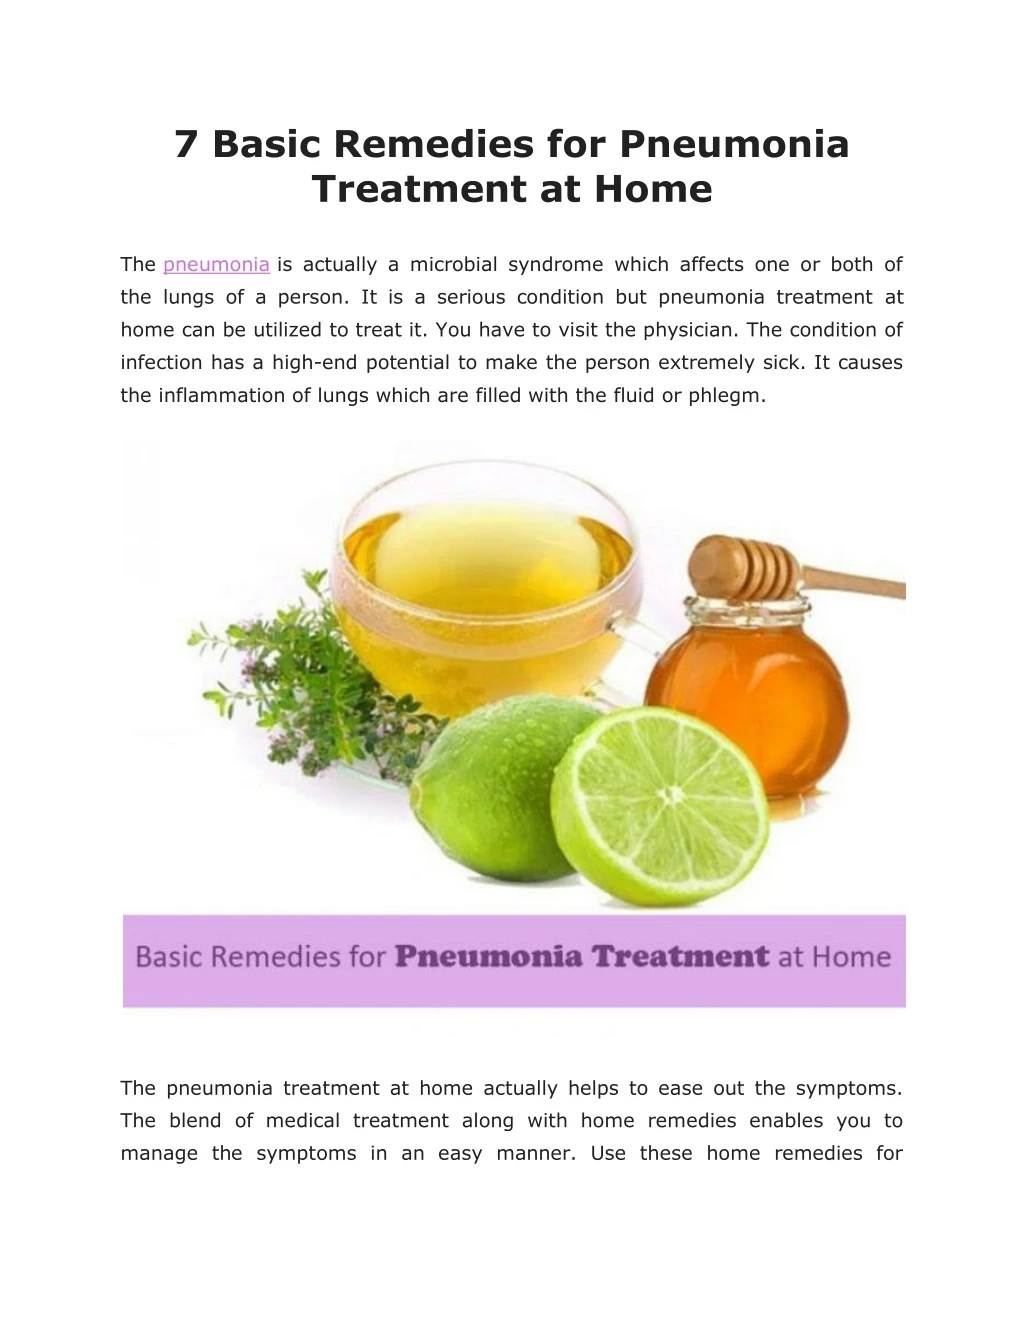 7 basic remedies for pneumonia treatment at home